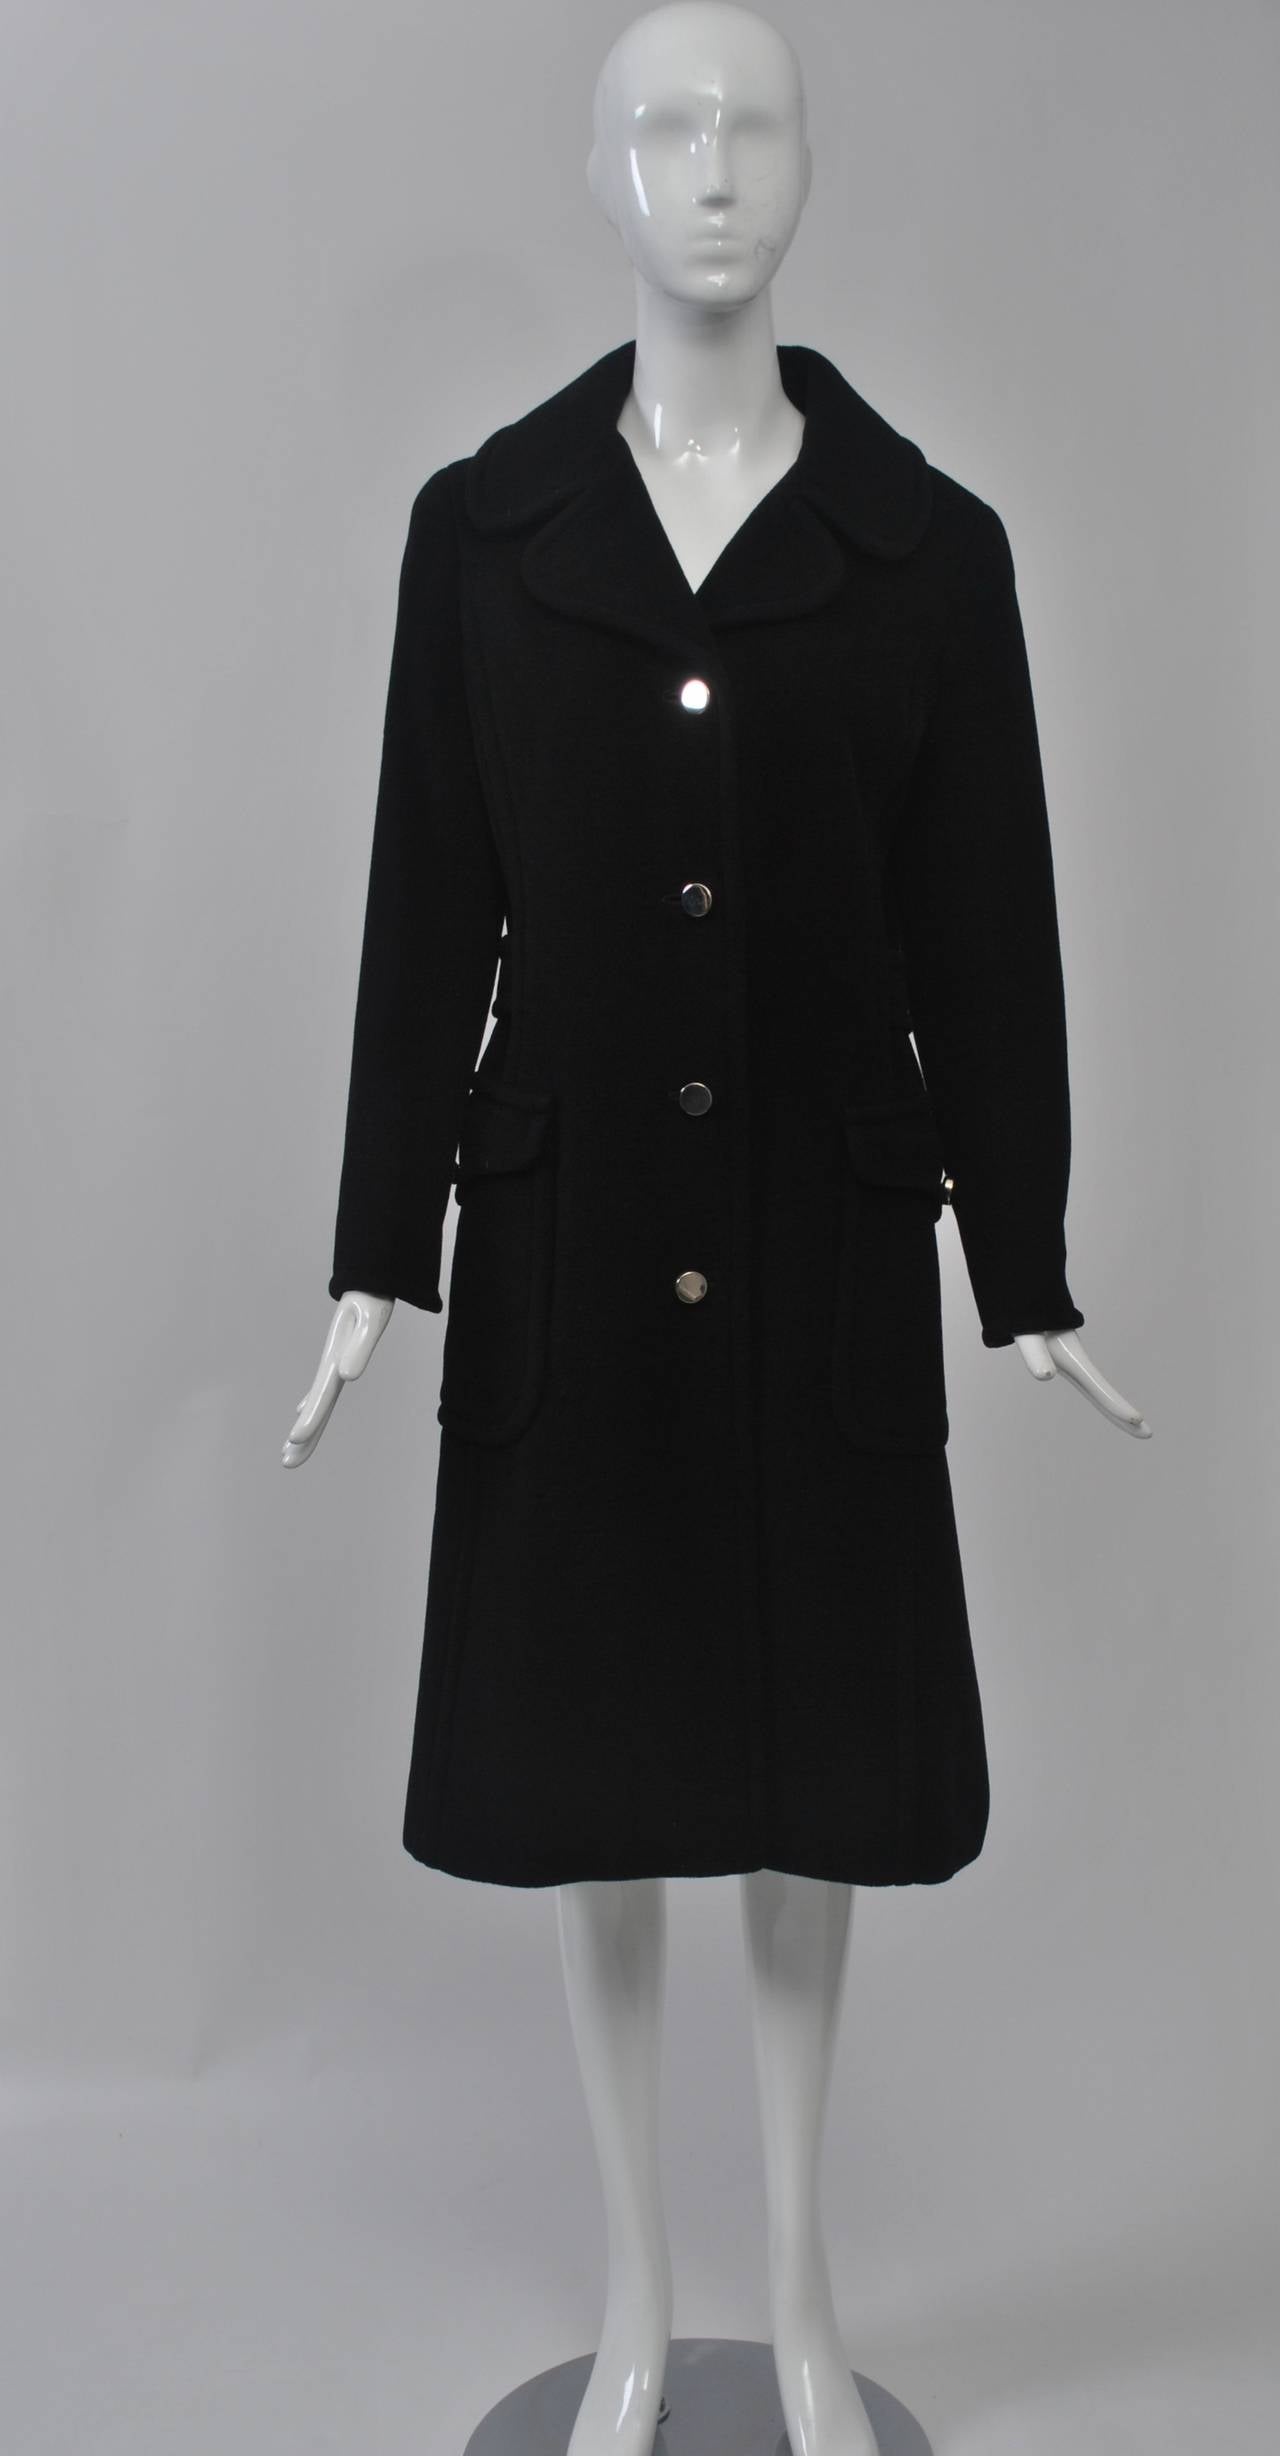 Attributed to Bill Gibb, who was at the forefront of the British fashion movement during the 1960s and '70s and who freelanced for the fashion firm Baccarat 1969-71, this coat has a contemporary look and great detailing. Slightly A-line in shape,